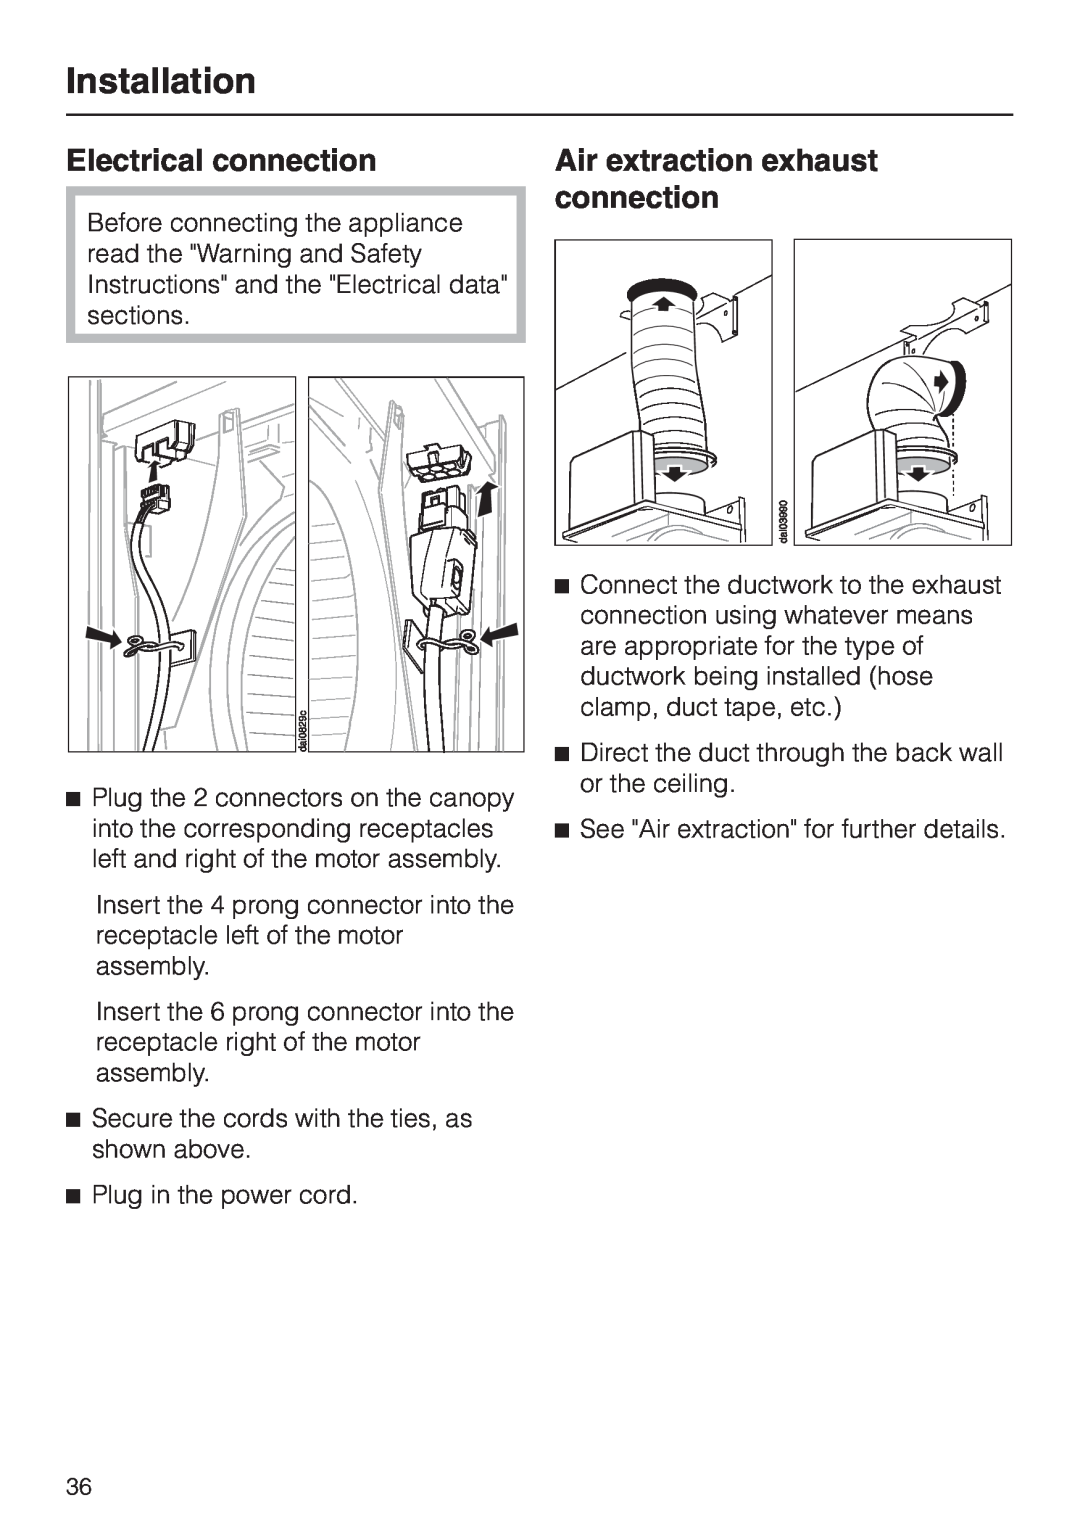 Miele DA217-3, DA 219-3 installation instructions Electrical connection, Air extraction exhaust connection, Installation 